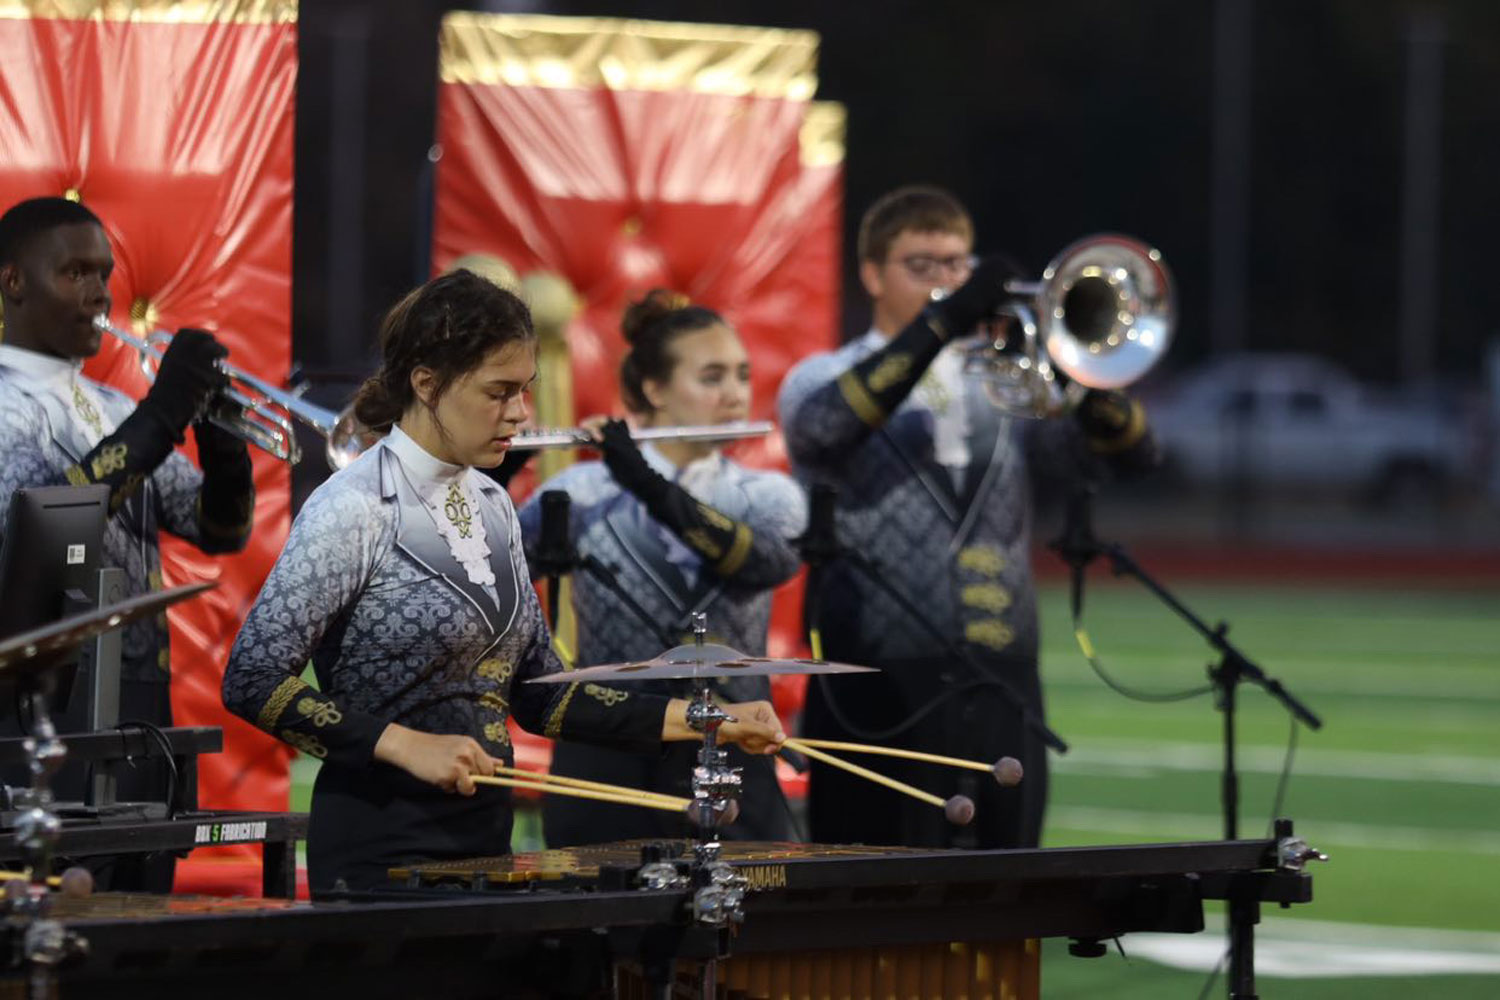 SUBMITTED PHOTO BY LOUREDES QUIJAS: Mallets in hand, Lourdes Quijas looks down as she plays her instrument during a sophomore year band performance. 